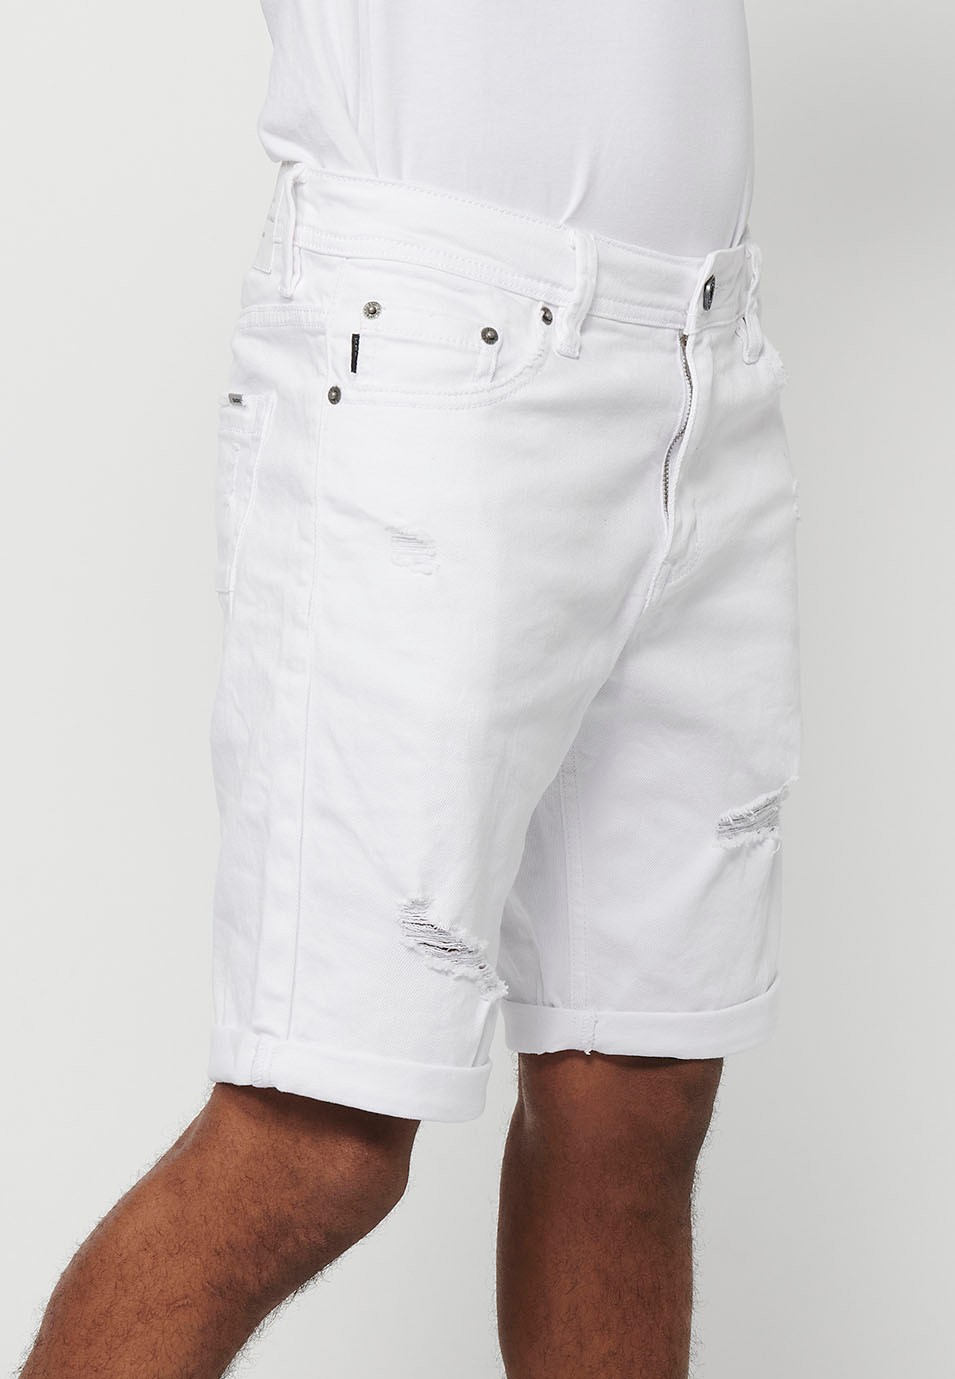 Denim Bermuda shorts with turn-up finish and front closure with zipper and button in White for Men 3